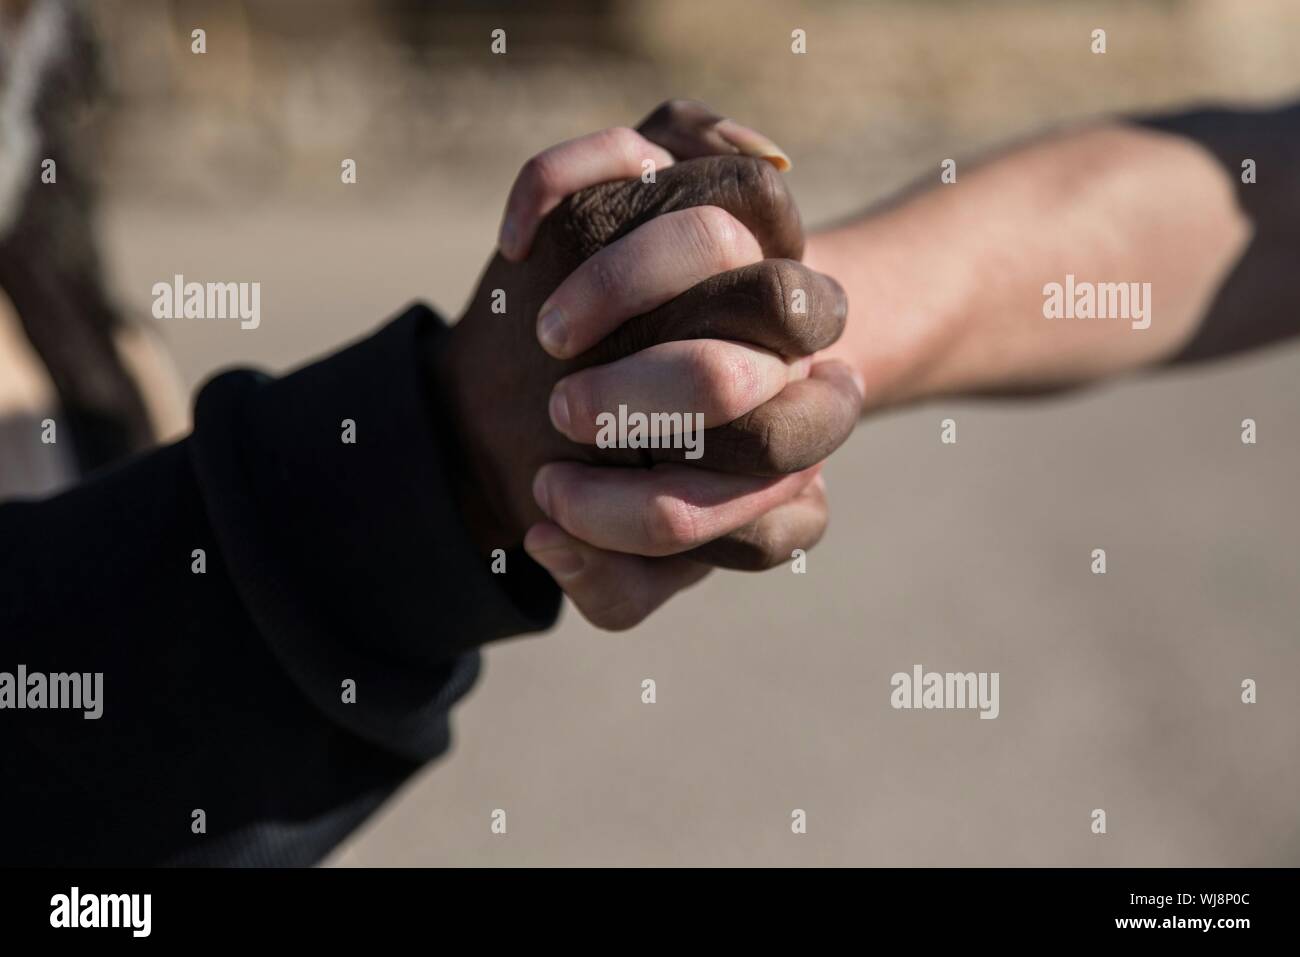 Close-up Of Hands Gripping Stock Photo